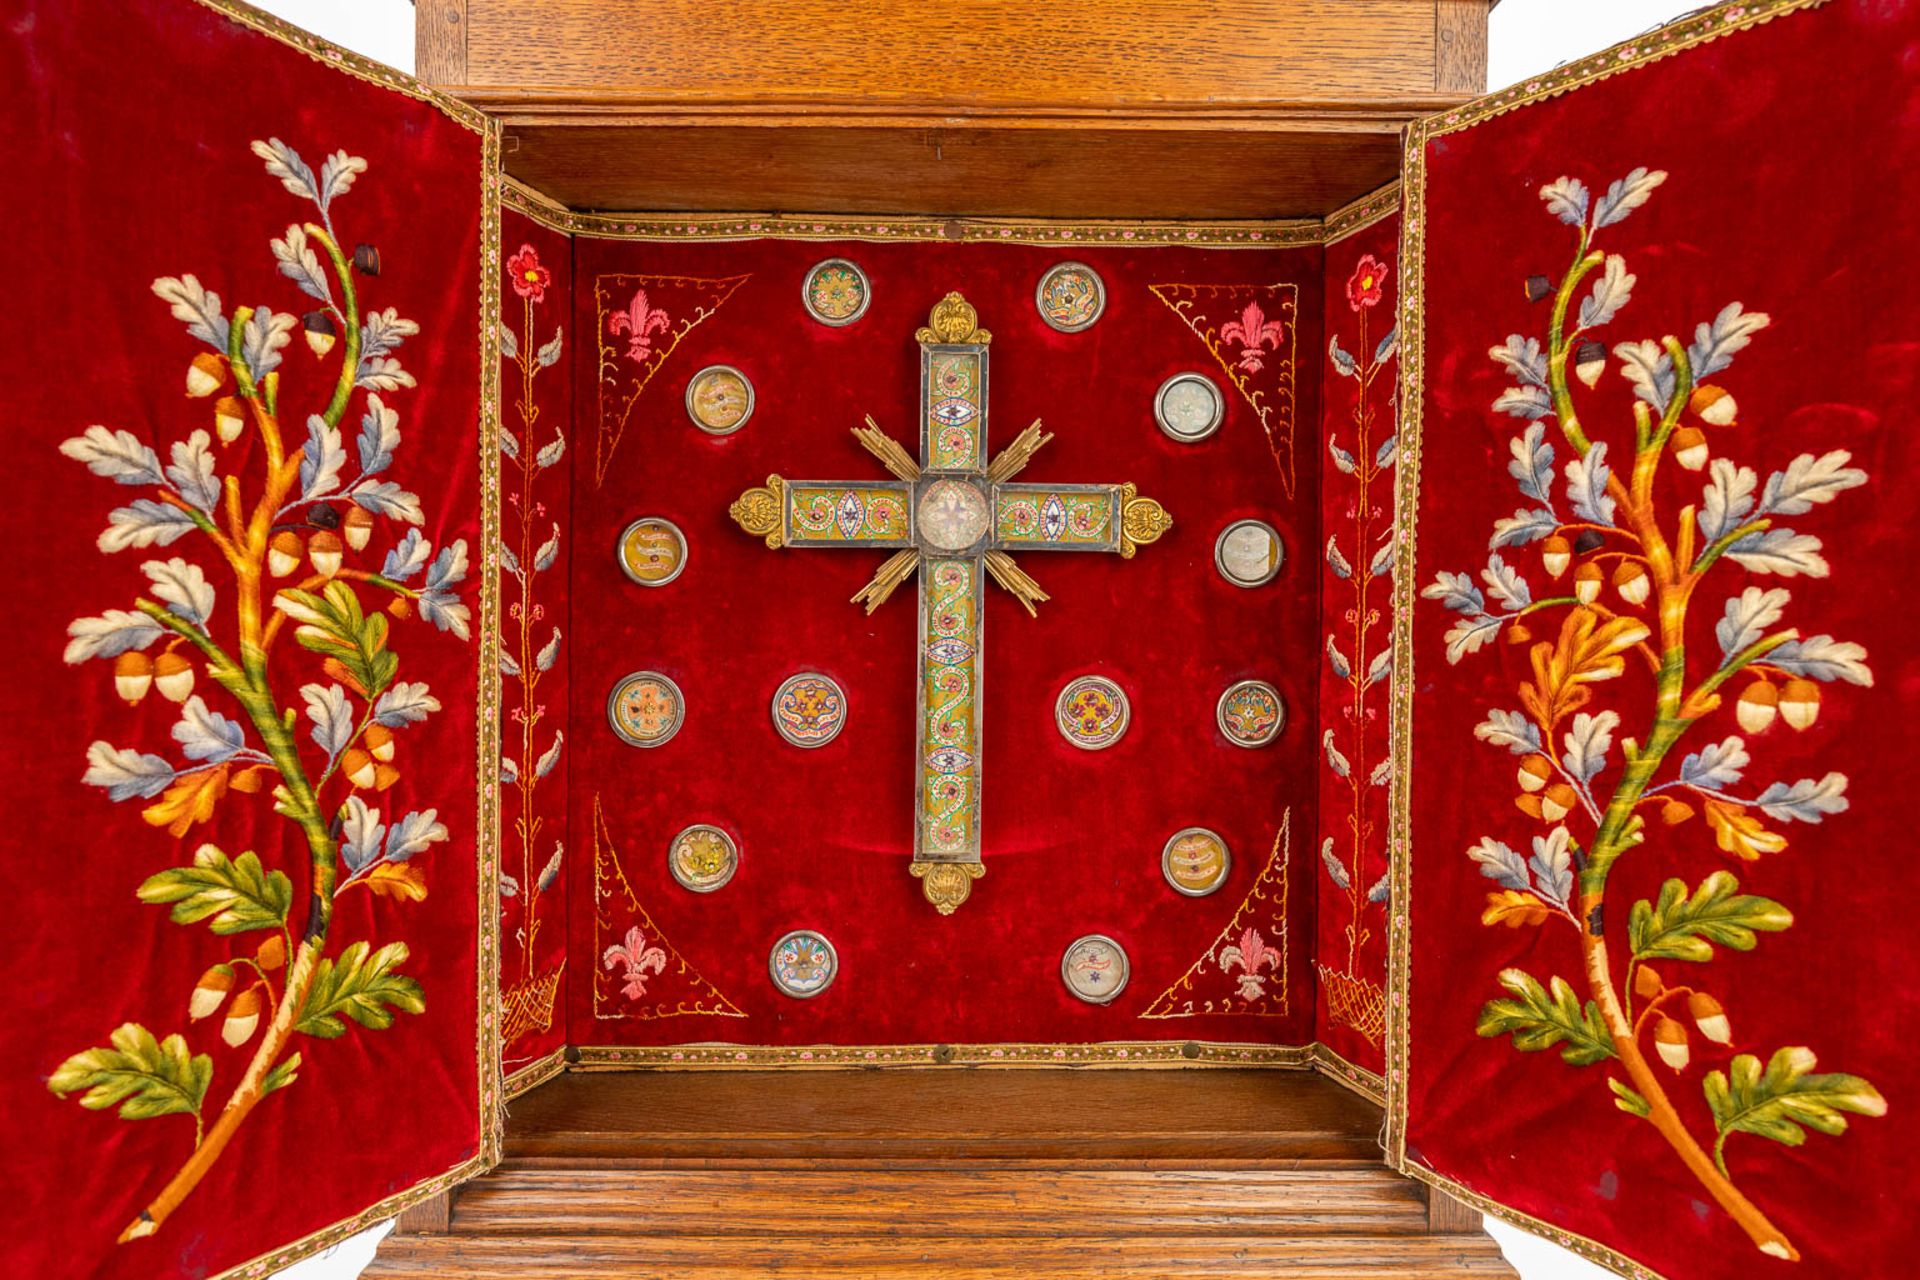 An antique reliquary box with relics a relic crucifix and embroidery. (L:13 x W:52 x H:75 cm) - Image 22 of 23